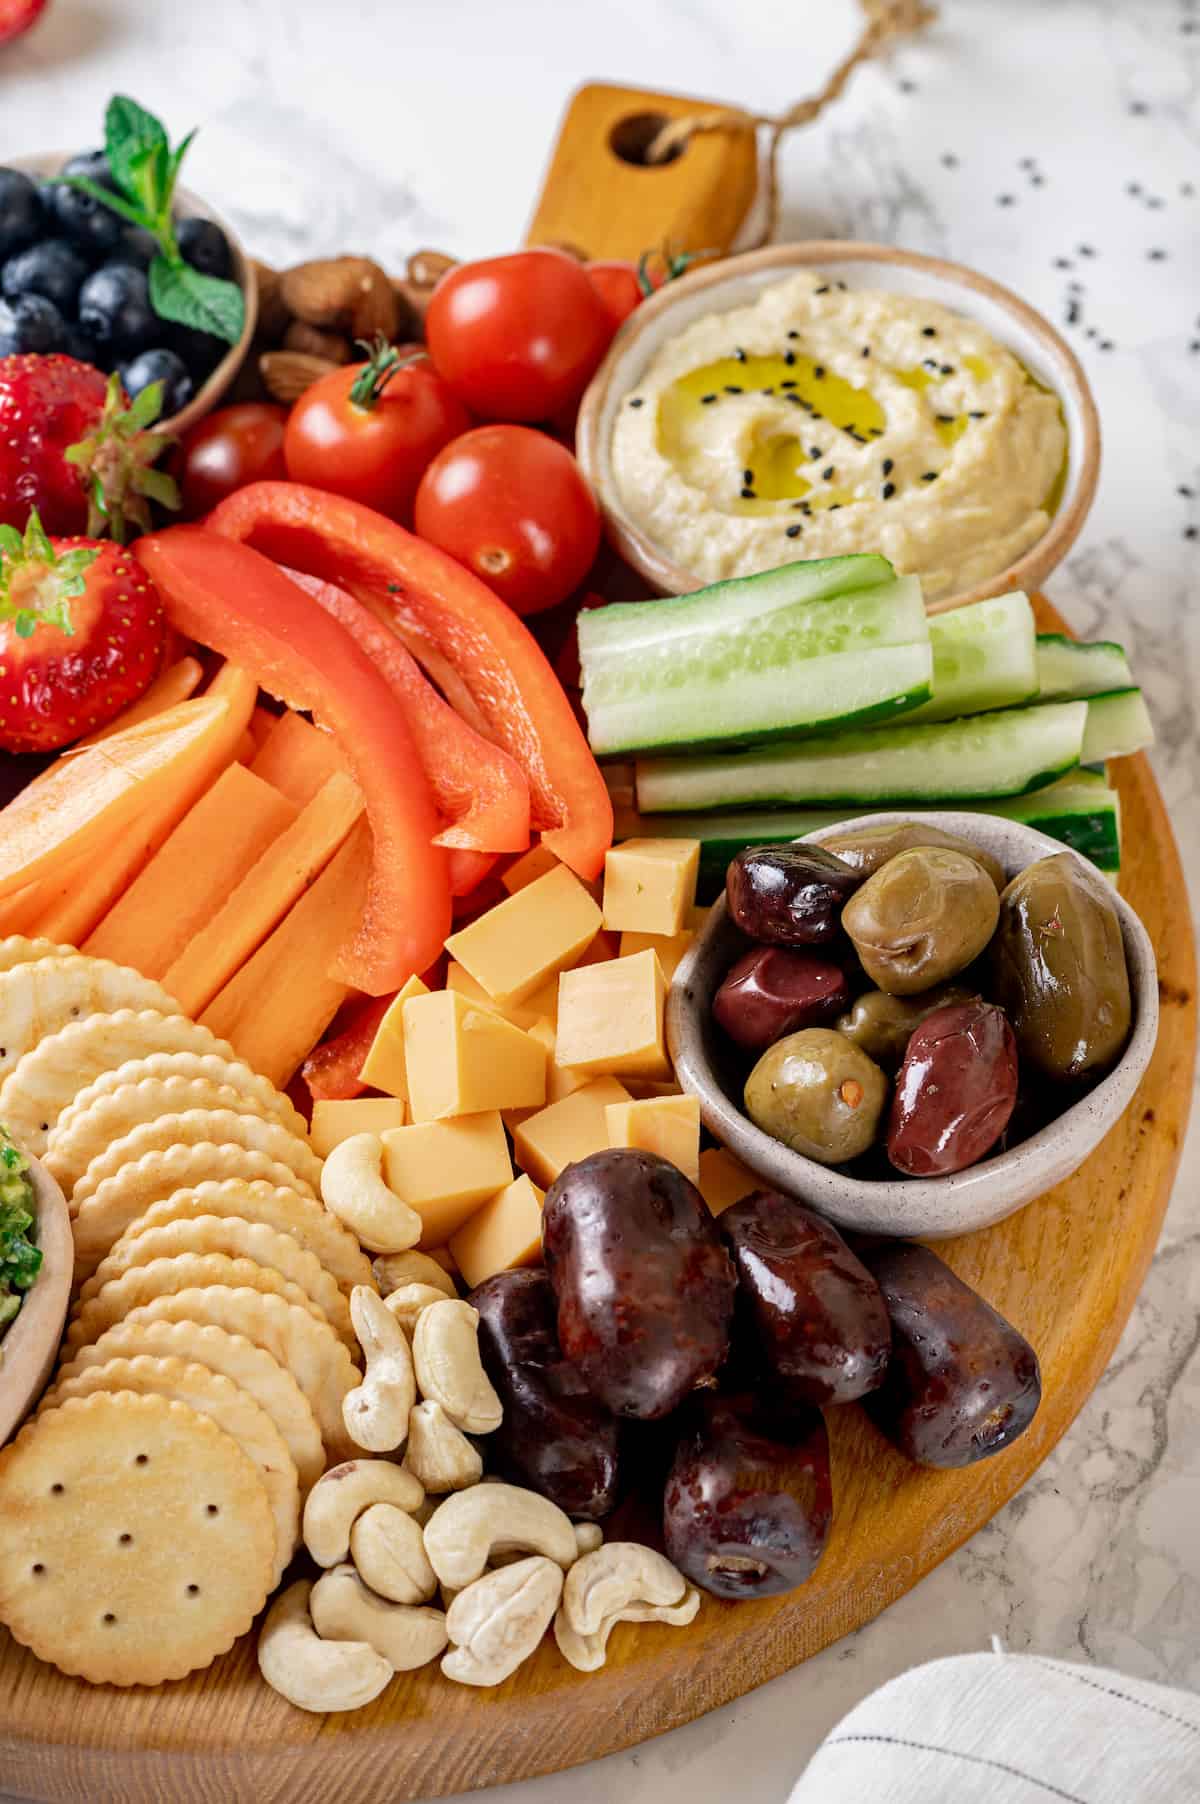 Vegan charcuterie board with cheese, olives, nuts, fruits, hummus, and veggies